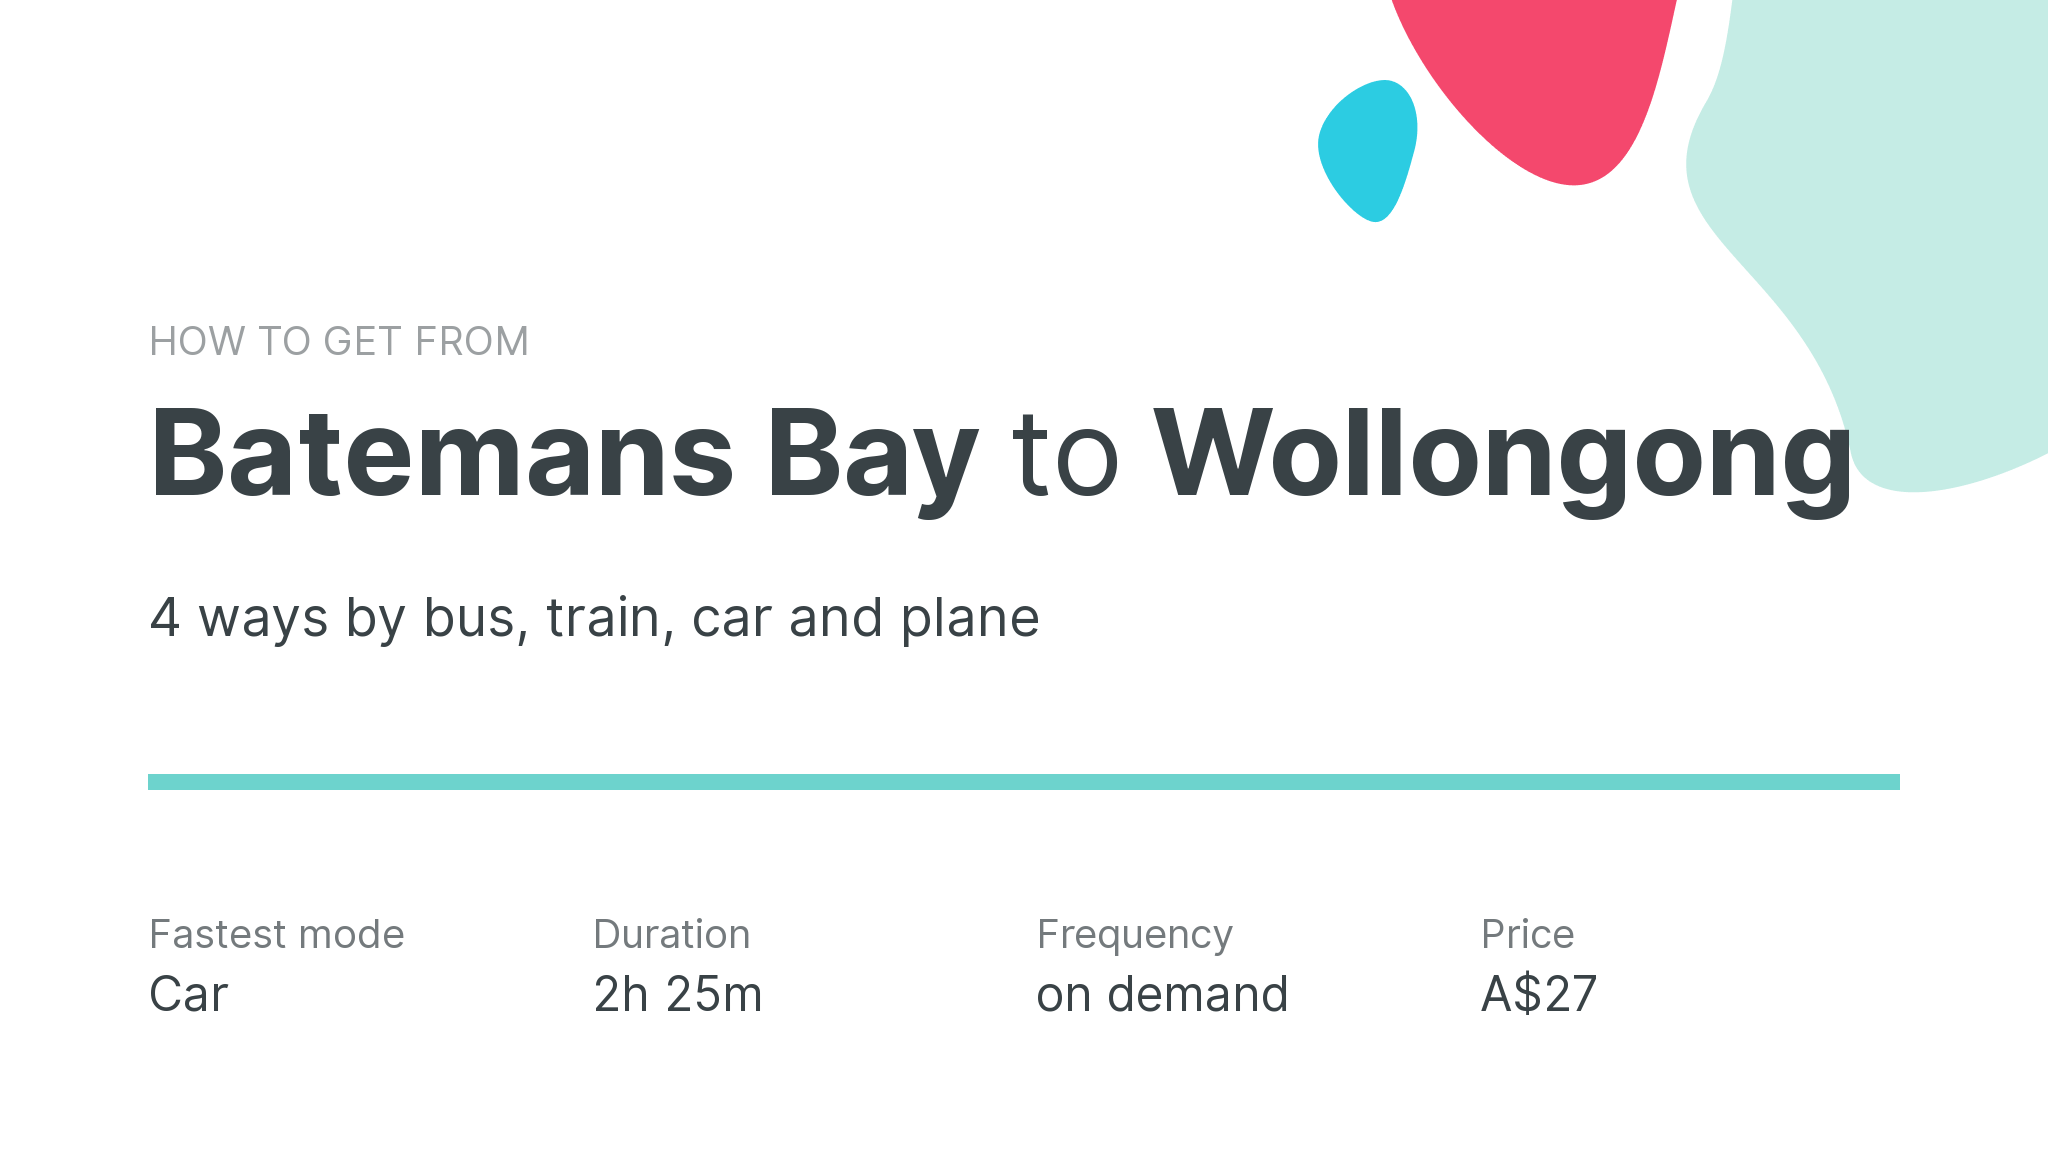 How do I get from Batemans Bay to Wollongong